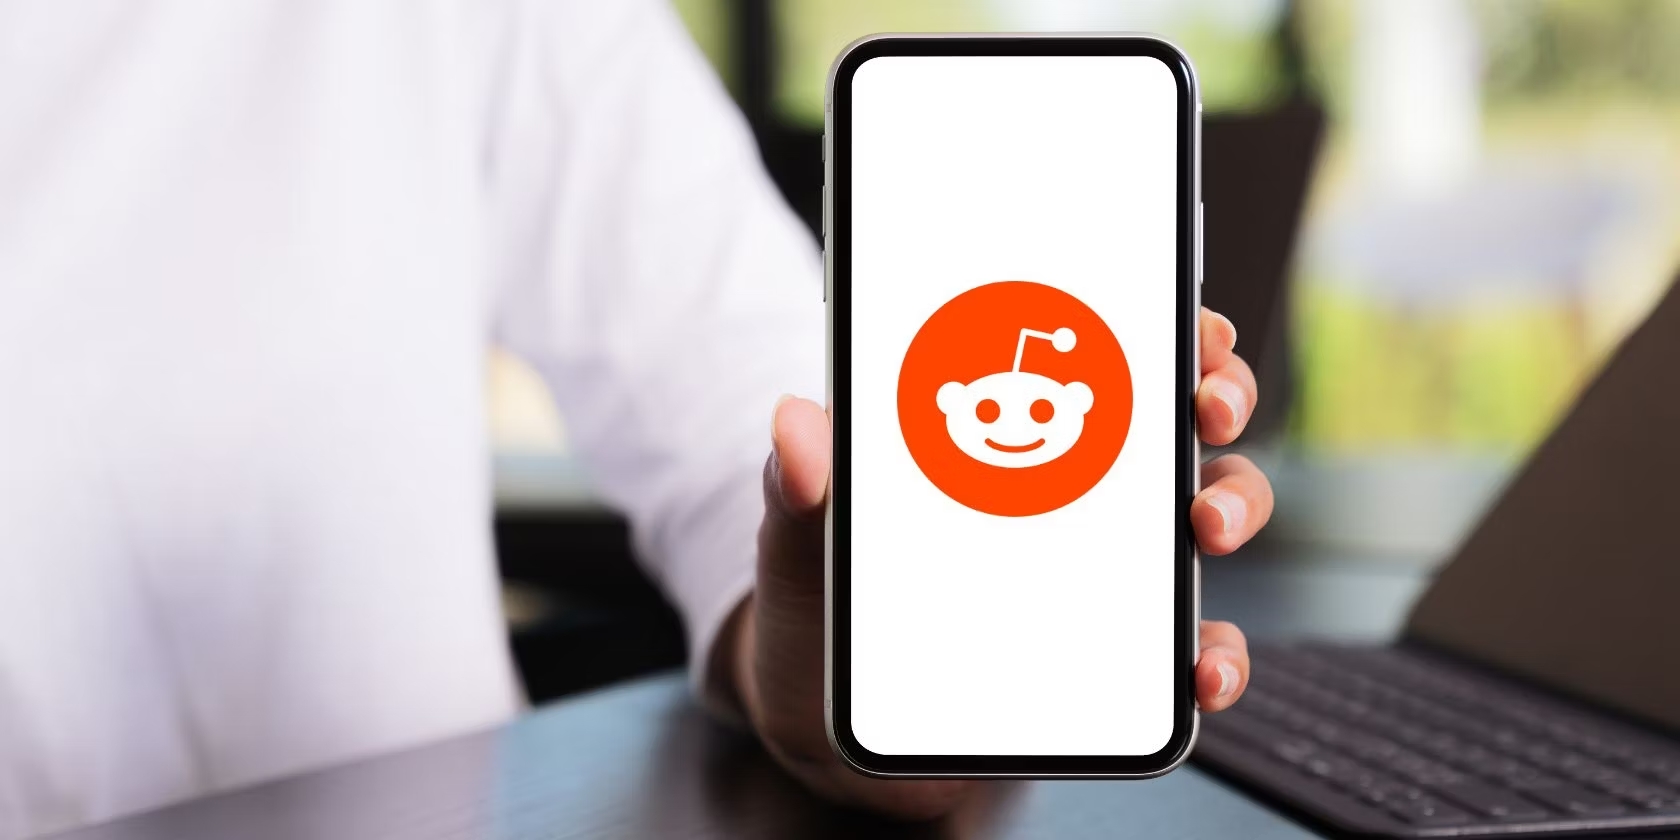 Reddit’s IPO Plans Could Benefit Its Most Engaged Users